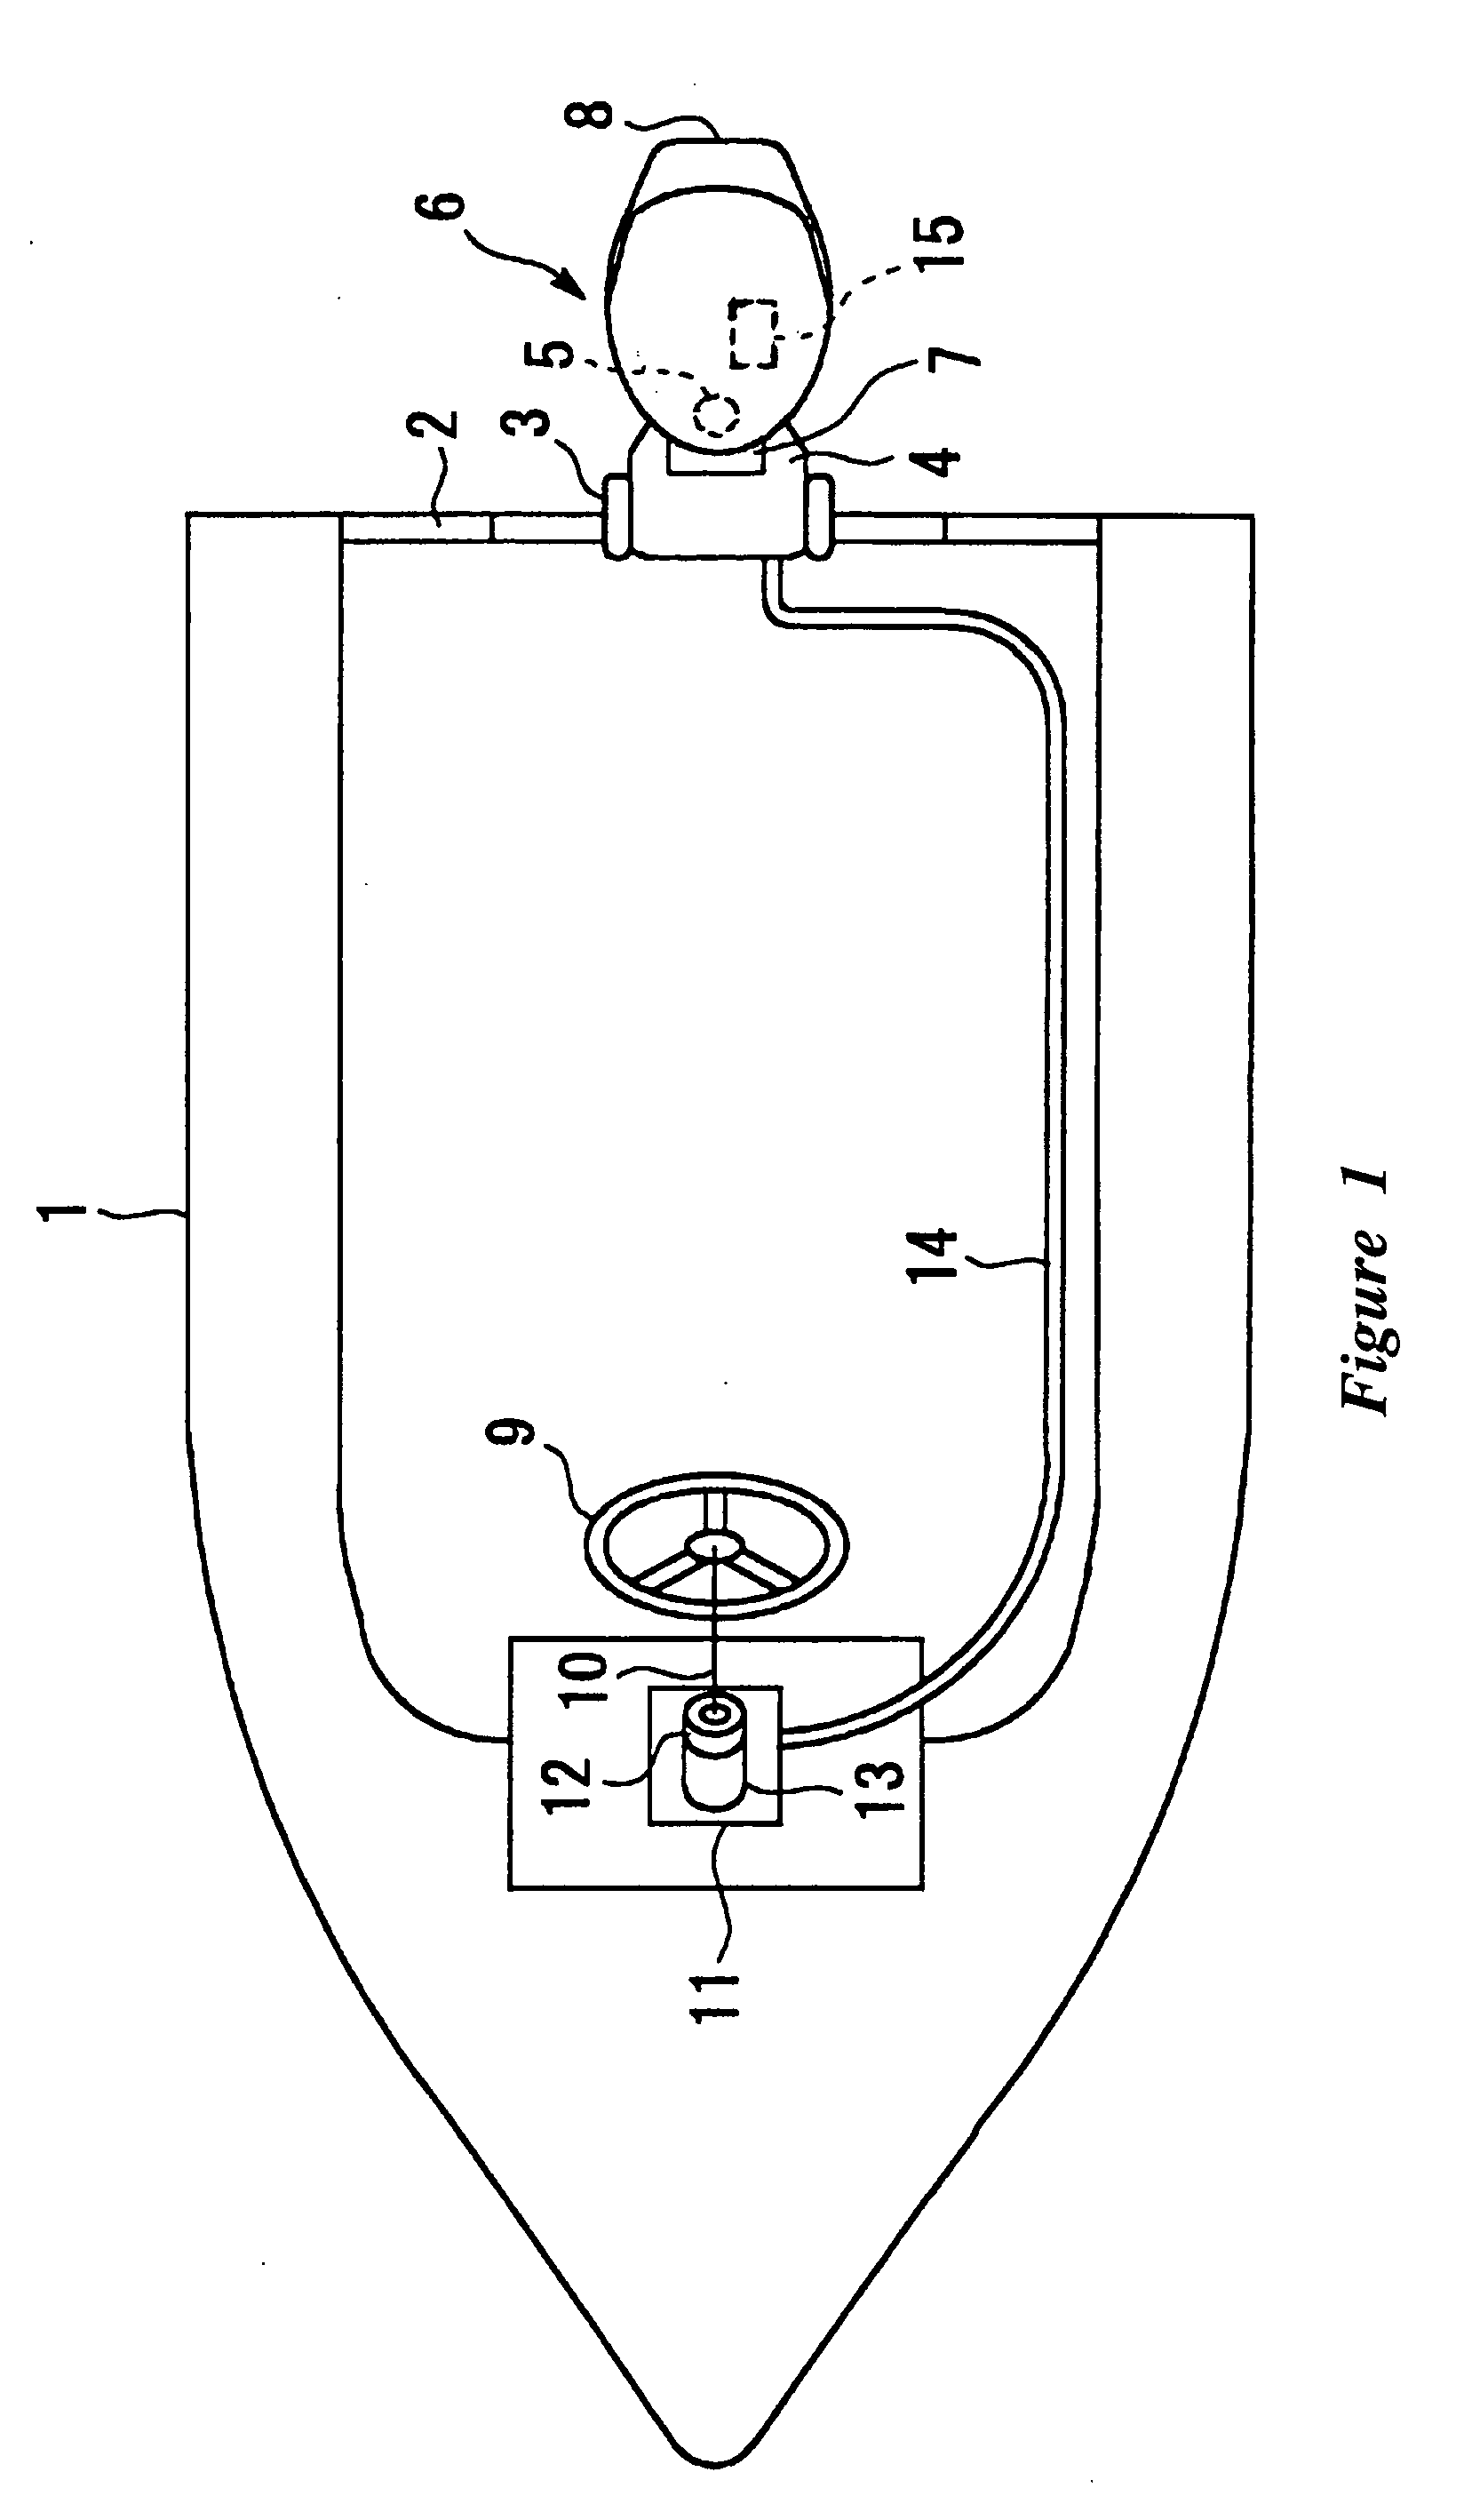 Steering system of outboard motor